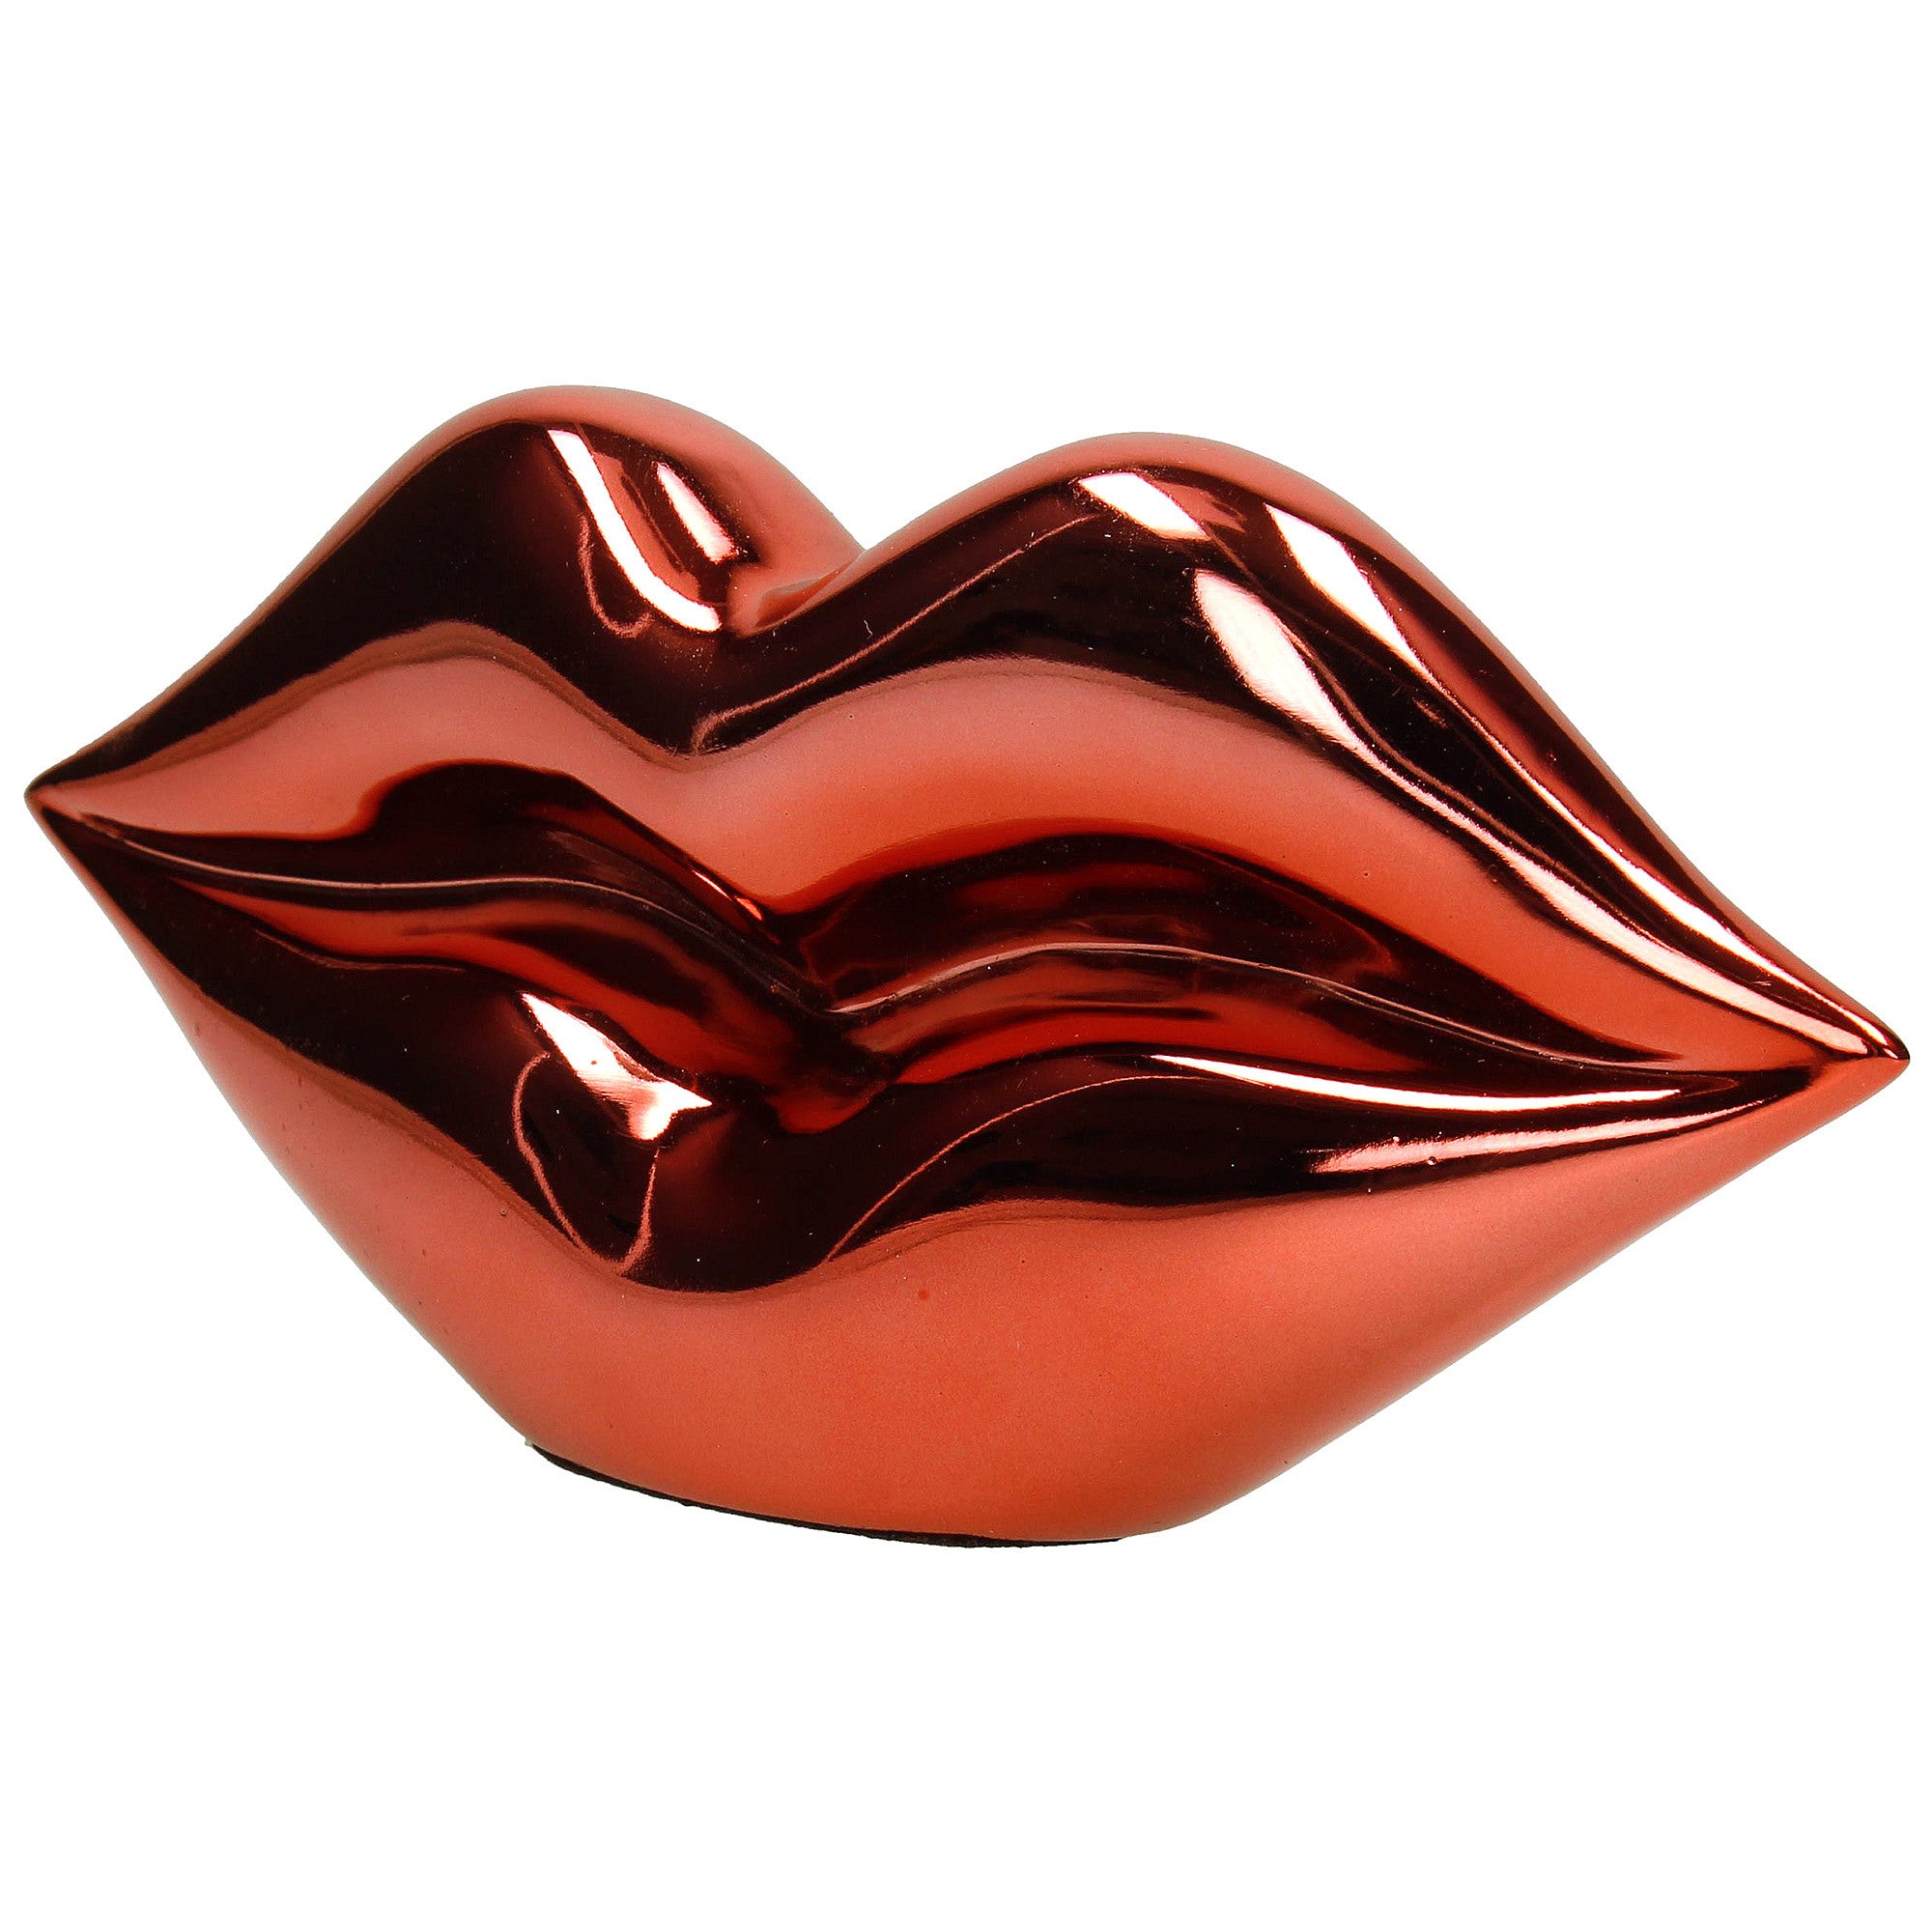 Luscious Red Lips Ornament (Second)